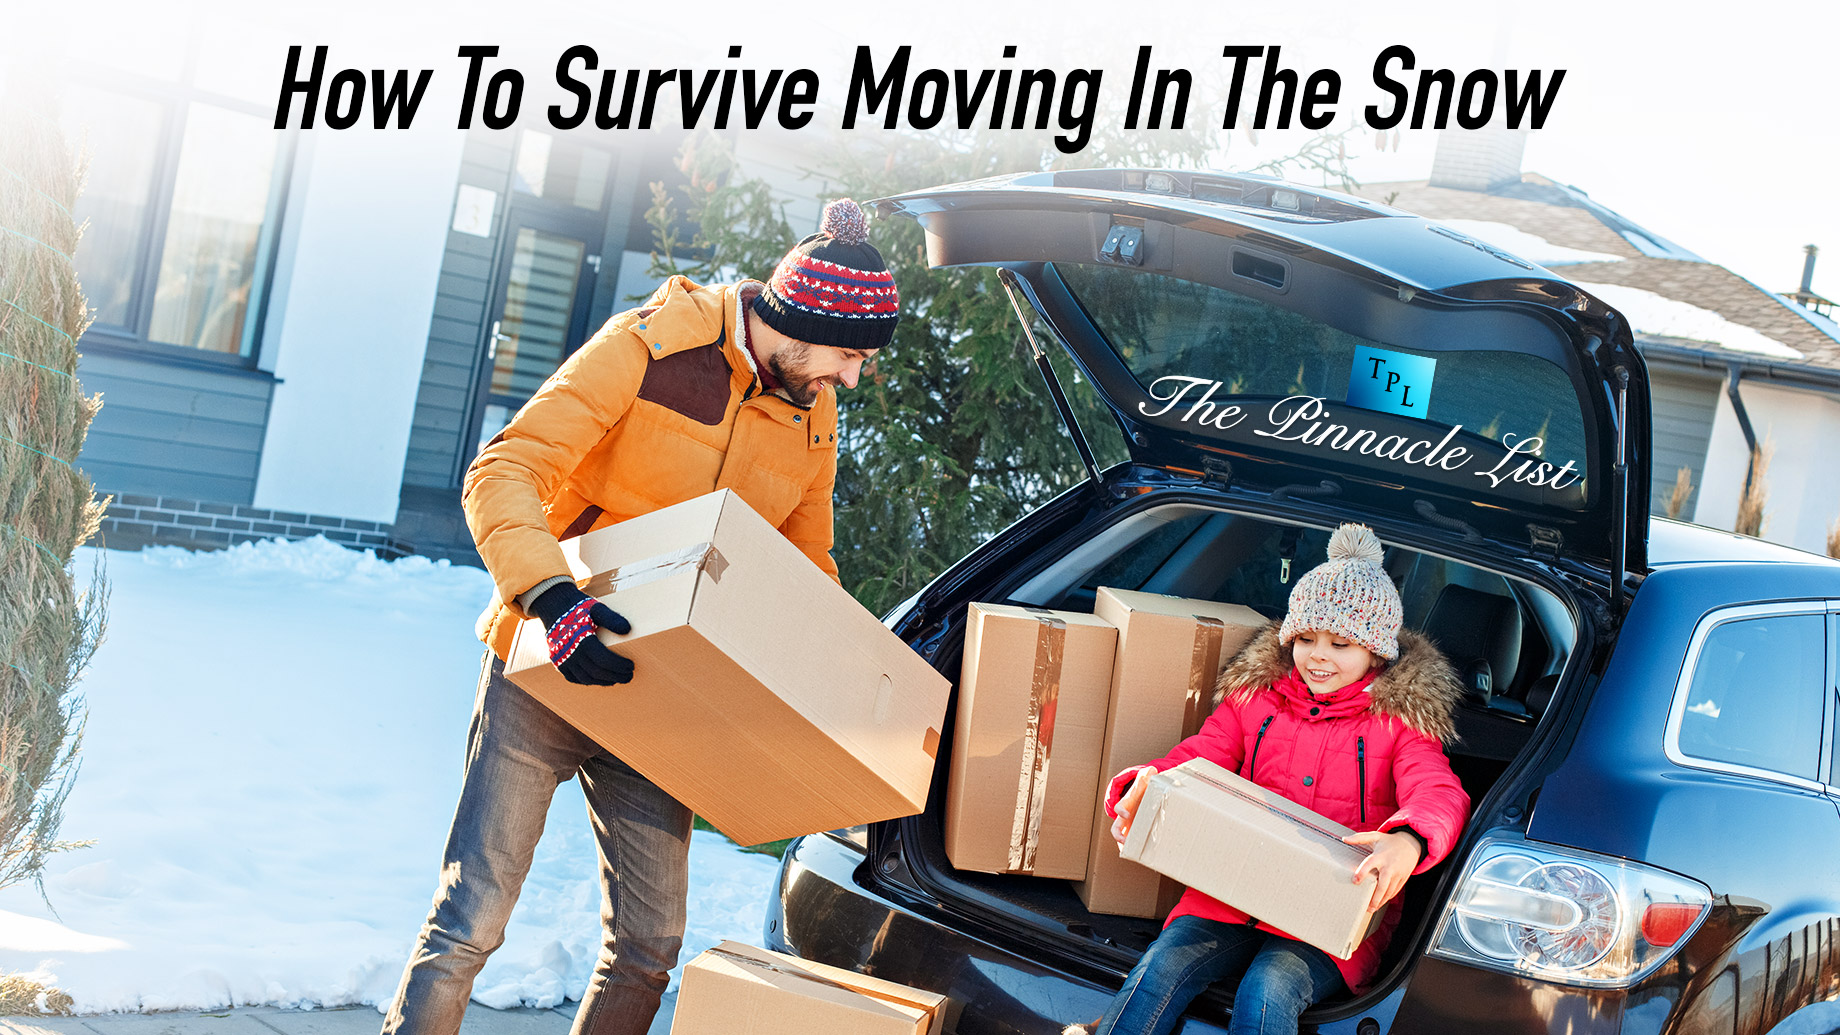 How To Survive Moving In The Snow